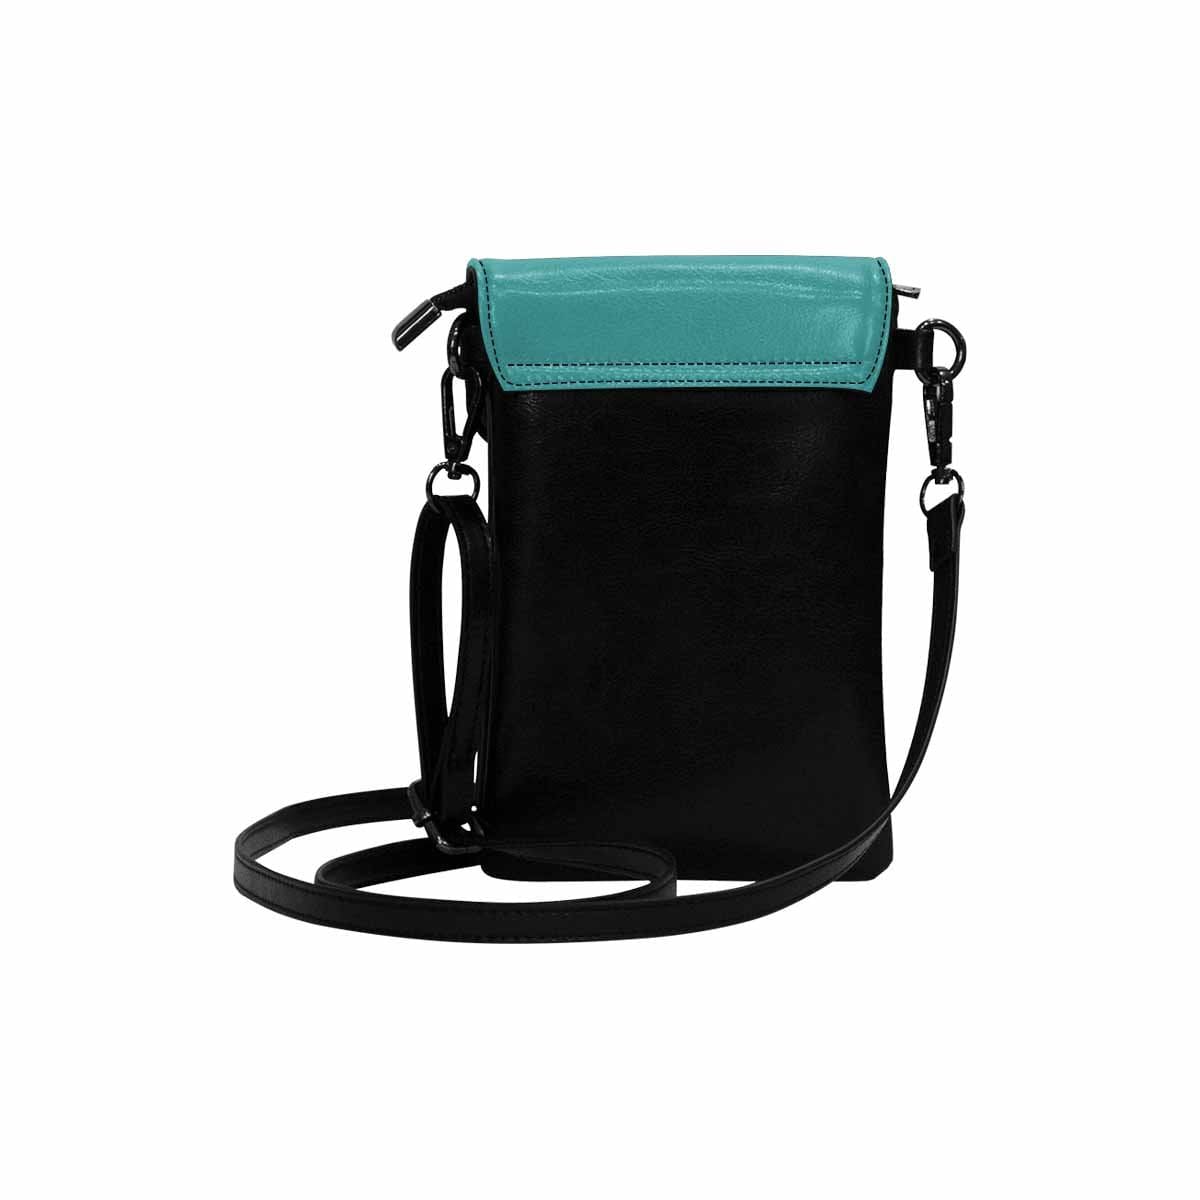 Womens Cell Phone Purse Mint Blue - Bags | Wallets | Phone Cases